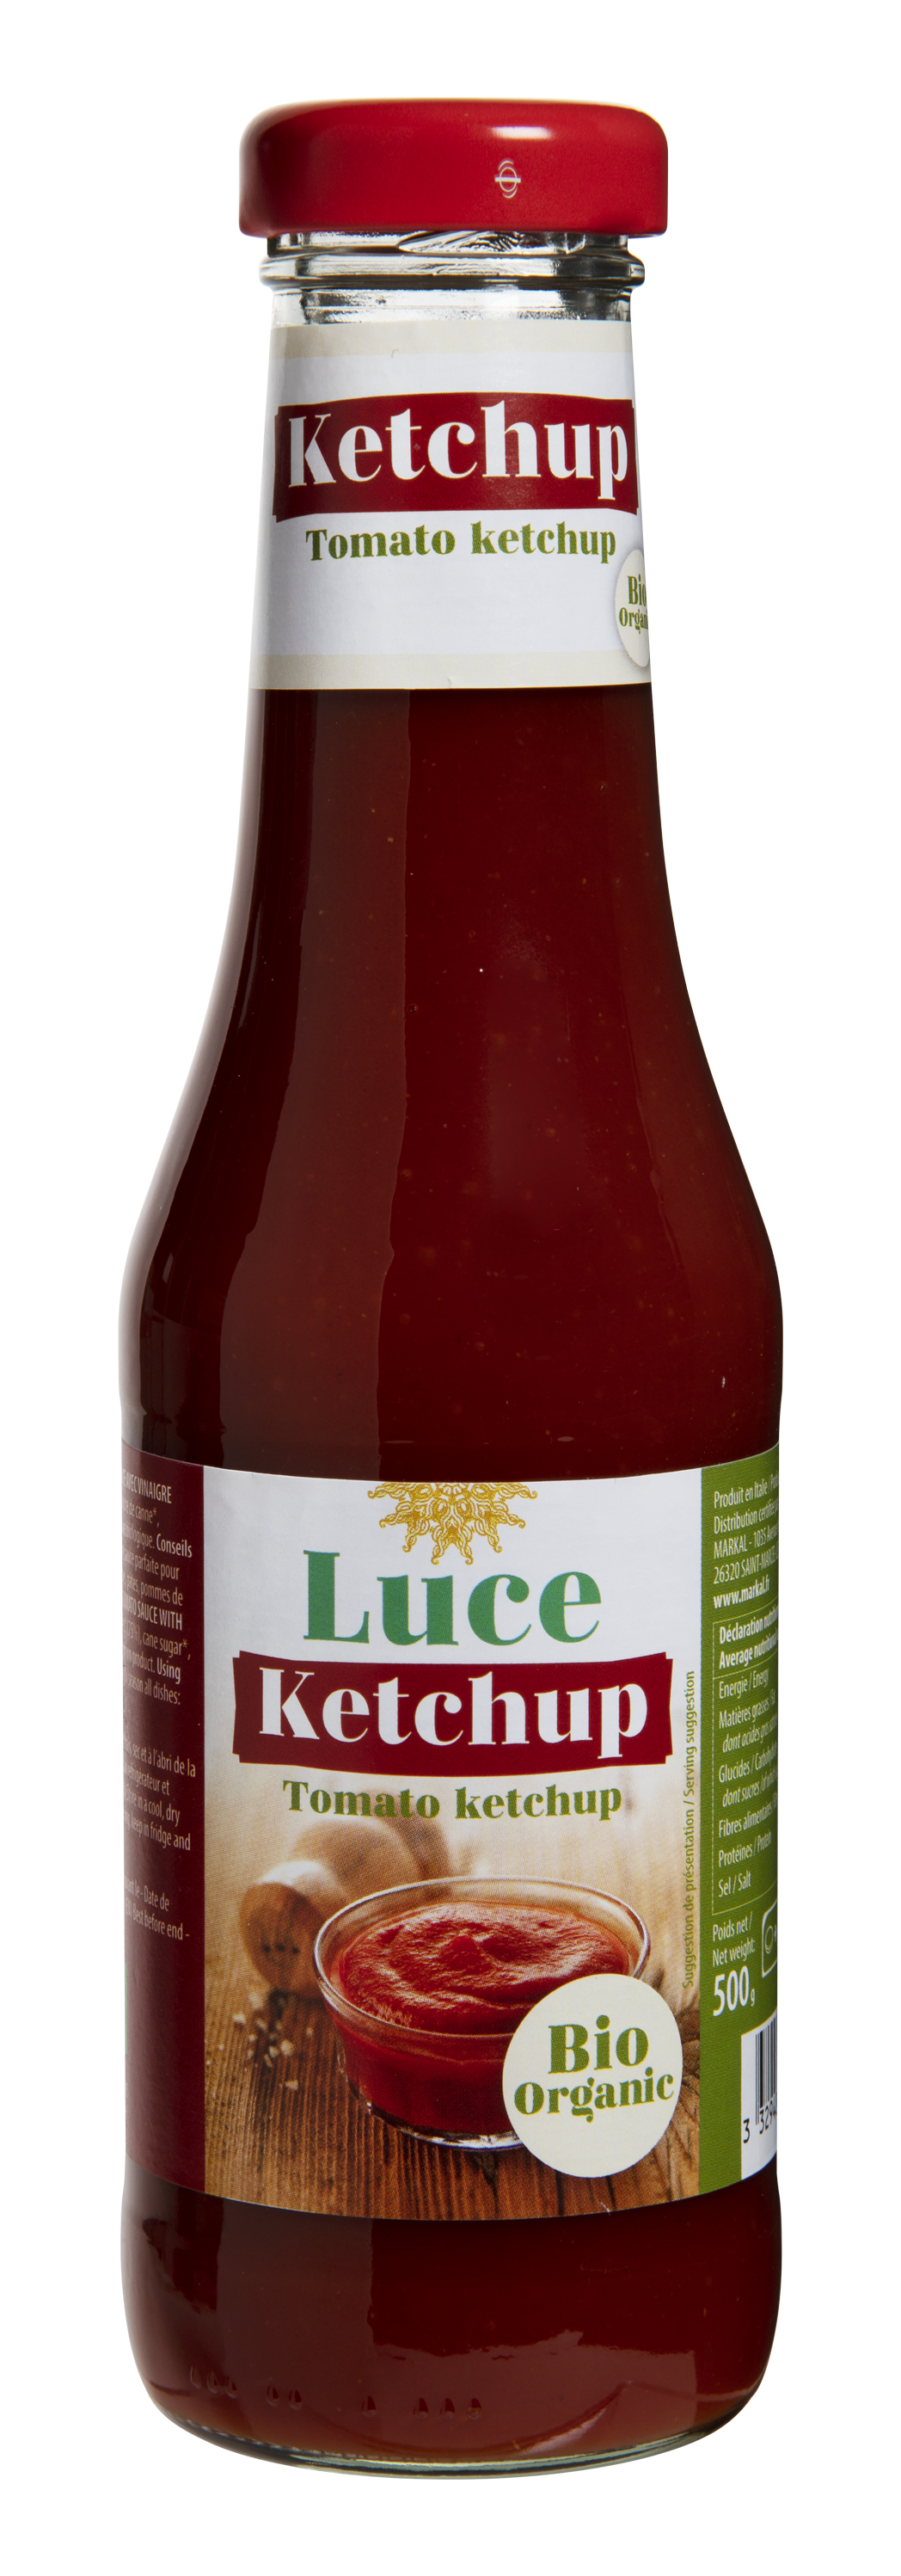 Ketchup (bouteille verre)